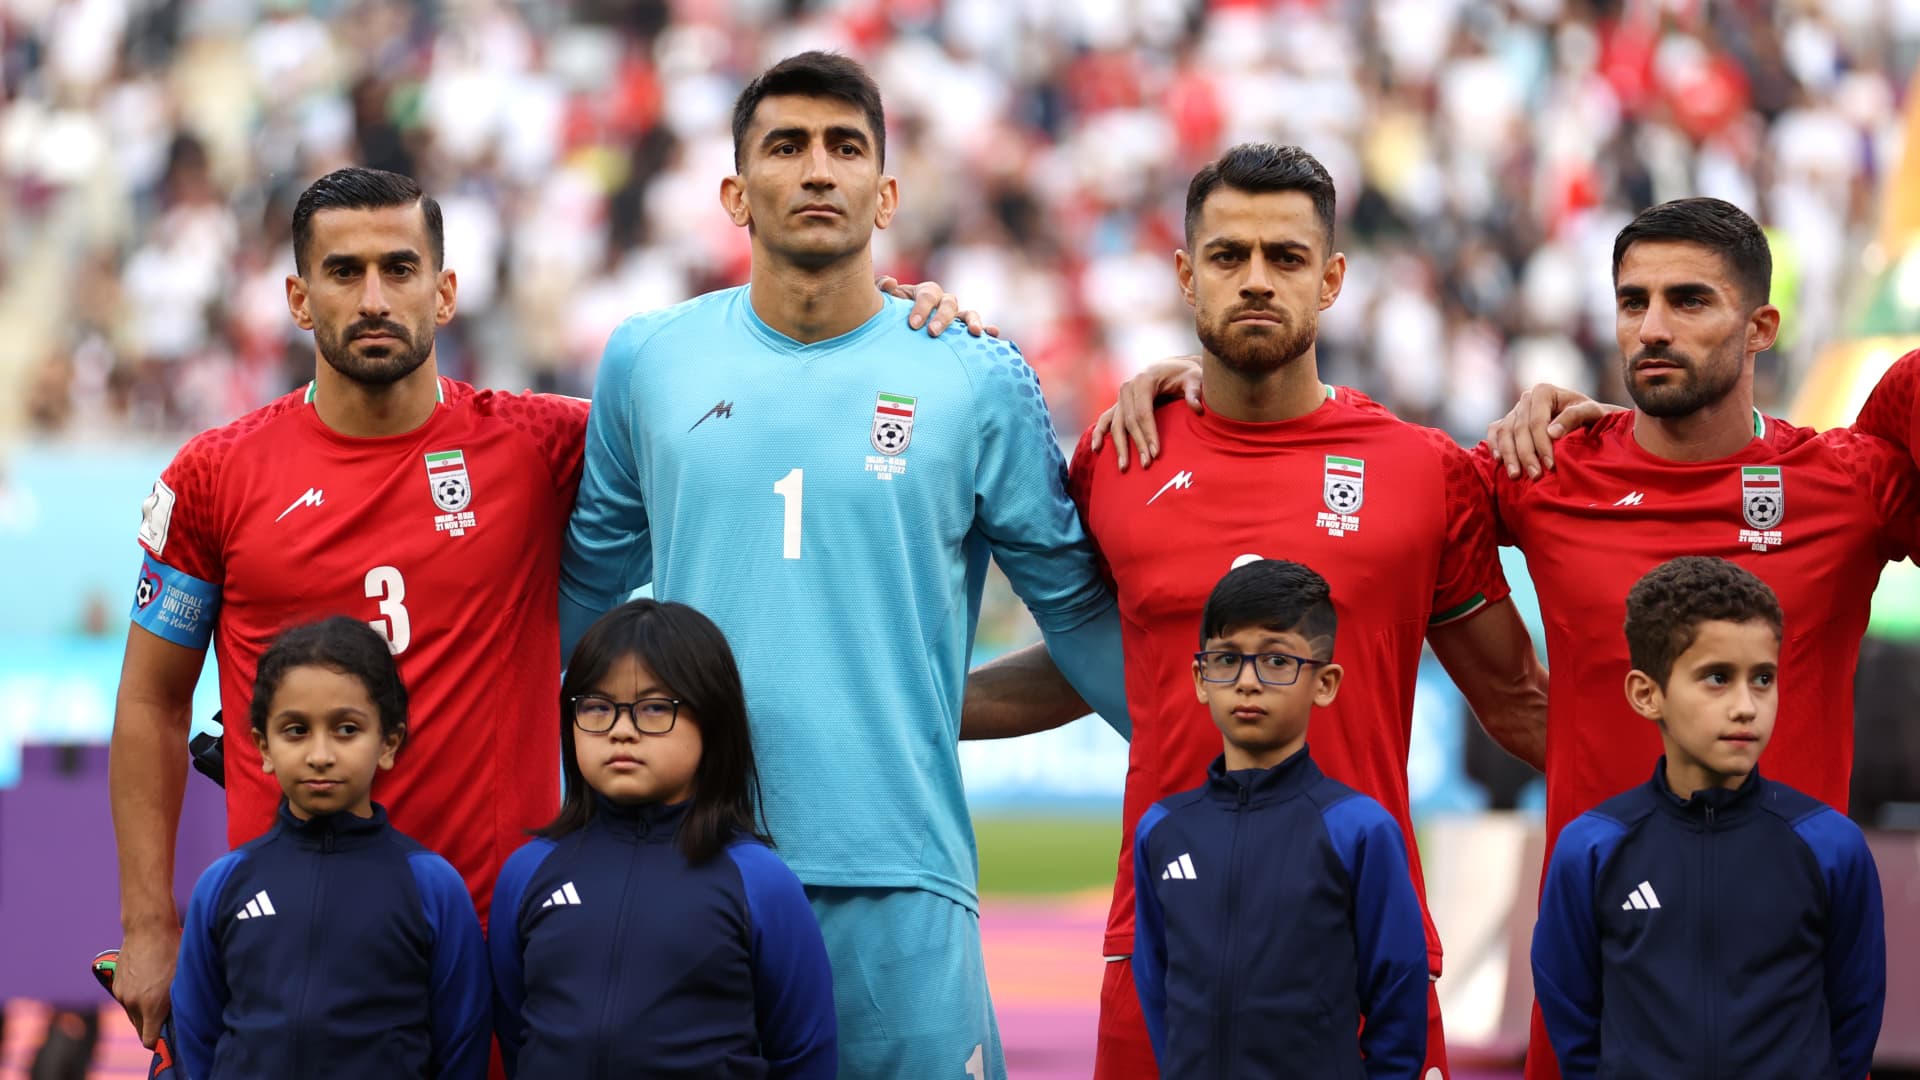 Iran players line up for the national anthem prior to the FIFA World Cup Qatar 2022 Group B match between England and IR Iran at Khalifa International Stadium on November 21, 2022 in Doha, Qatar.